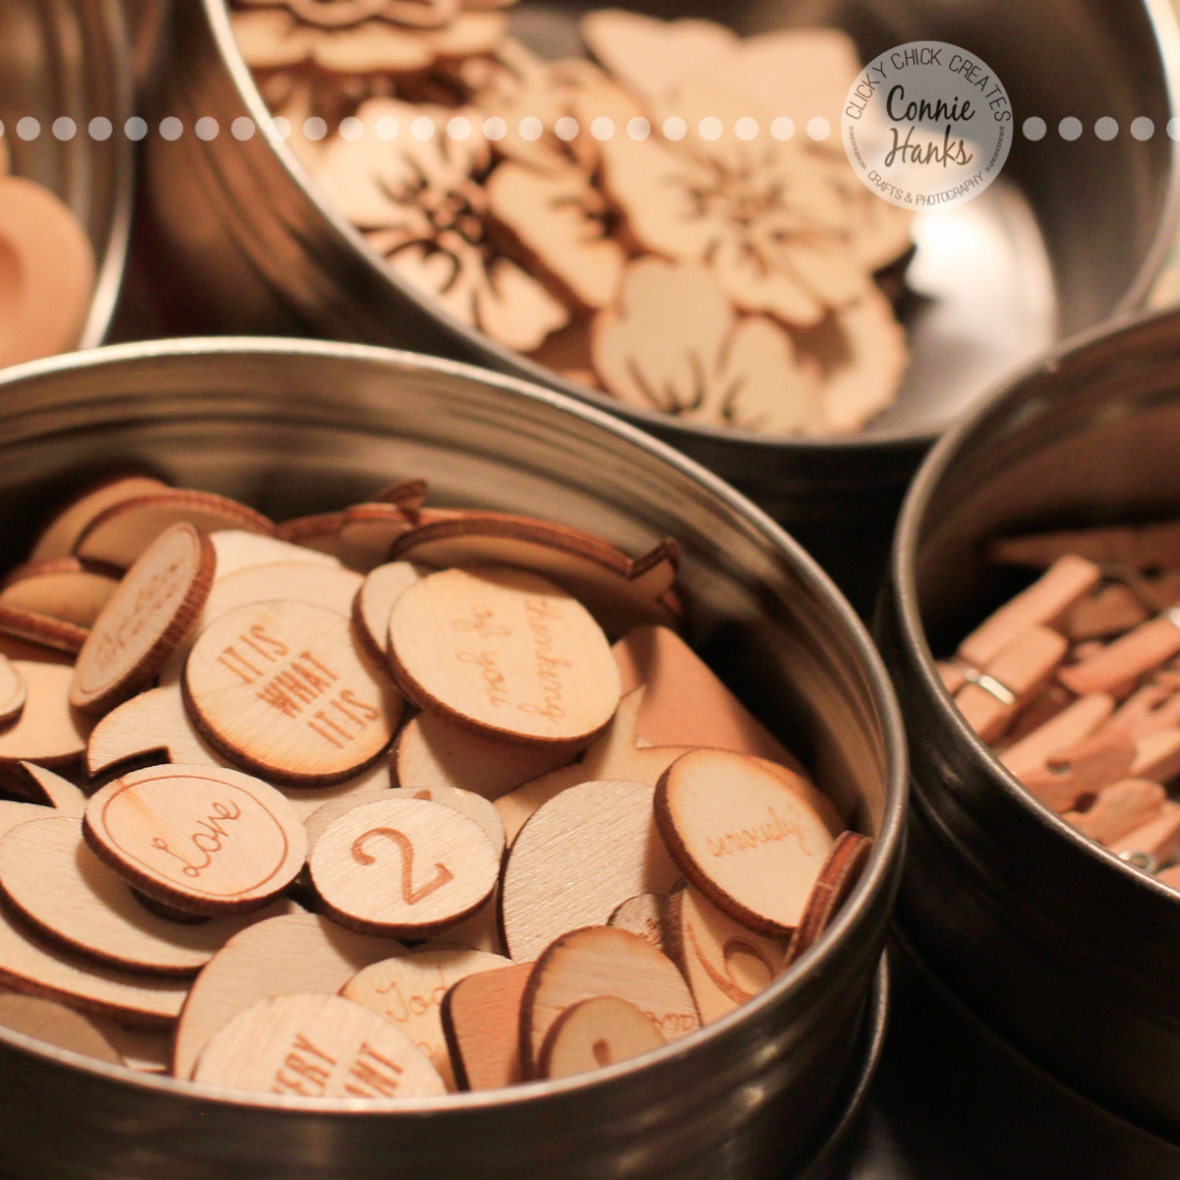 Connie Hanks Photography // ClickyChickCreates.com // spice containers holding crafty wood veneers